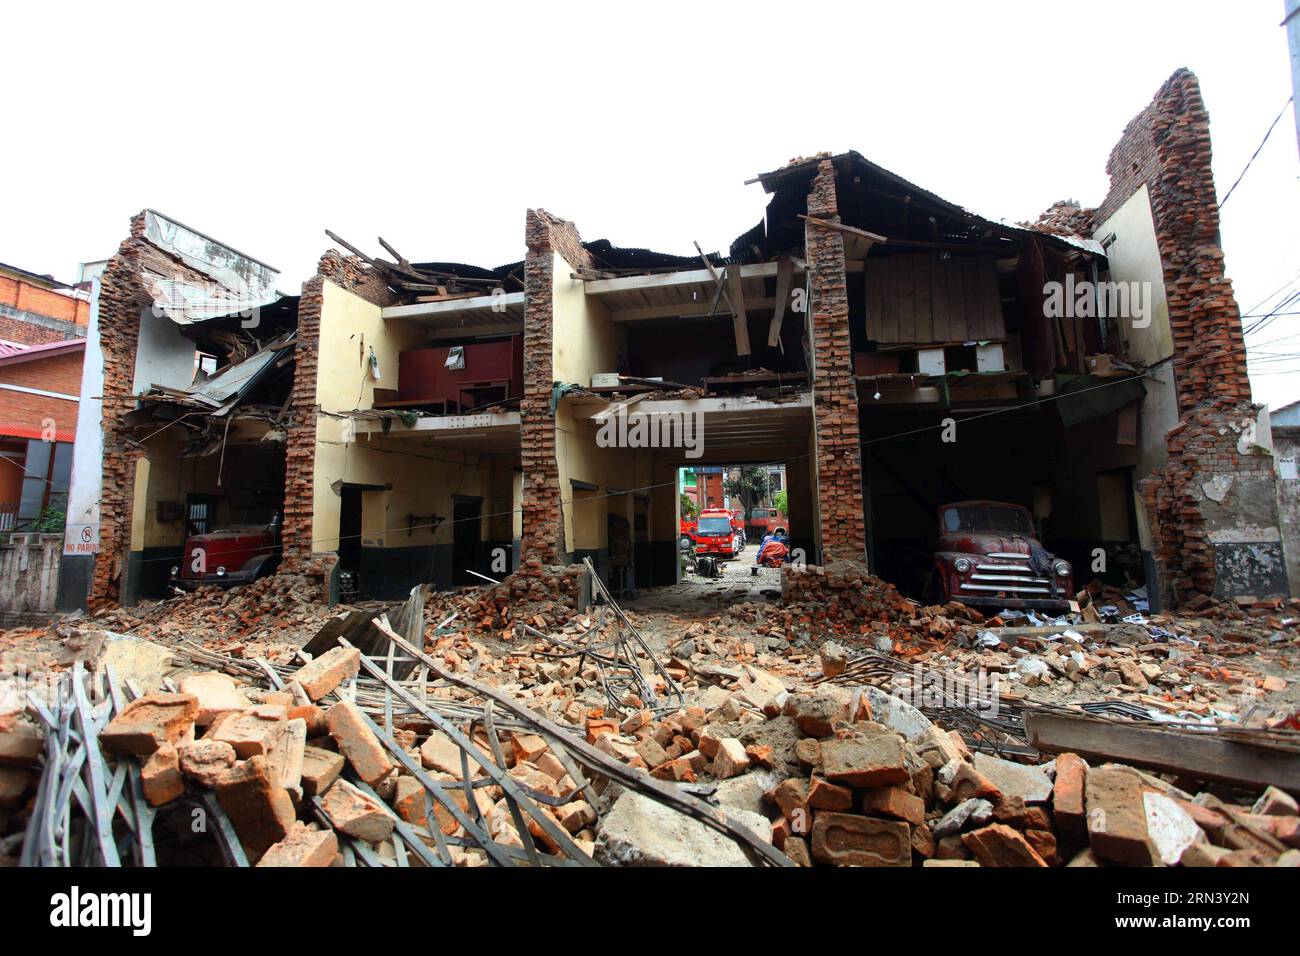 (150429) -- LALITPUR, April 29, 2015 -- A fire station is seen damaged after earthquake in Lalitpur, Nepal, April 29, 2015. The 7.9-magnitude quake hit Nepal at midday on Saturday. The death toll from the powerful earthquake has soared to 5,057 and a total of 10,915 others were injured. ) (djj) NEPAL-LALITPUR-EARTHQUAKE-AFTERMATH SunilxSharma PUBLICATIONxNOTxINxCHN   Lalitpur April 29 2015 a Fire Station IS Lakes damaged After Earthquake in Lalitpur Nepal April 29 2015 The 7 9 magnitude Quake Hit Nepal AT midday ON Saturday The Death toll from The Powerful Earthquake has soared to 5  and a tot Stock Photo